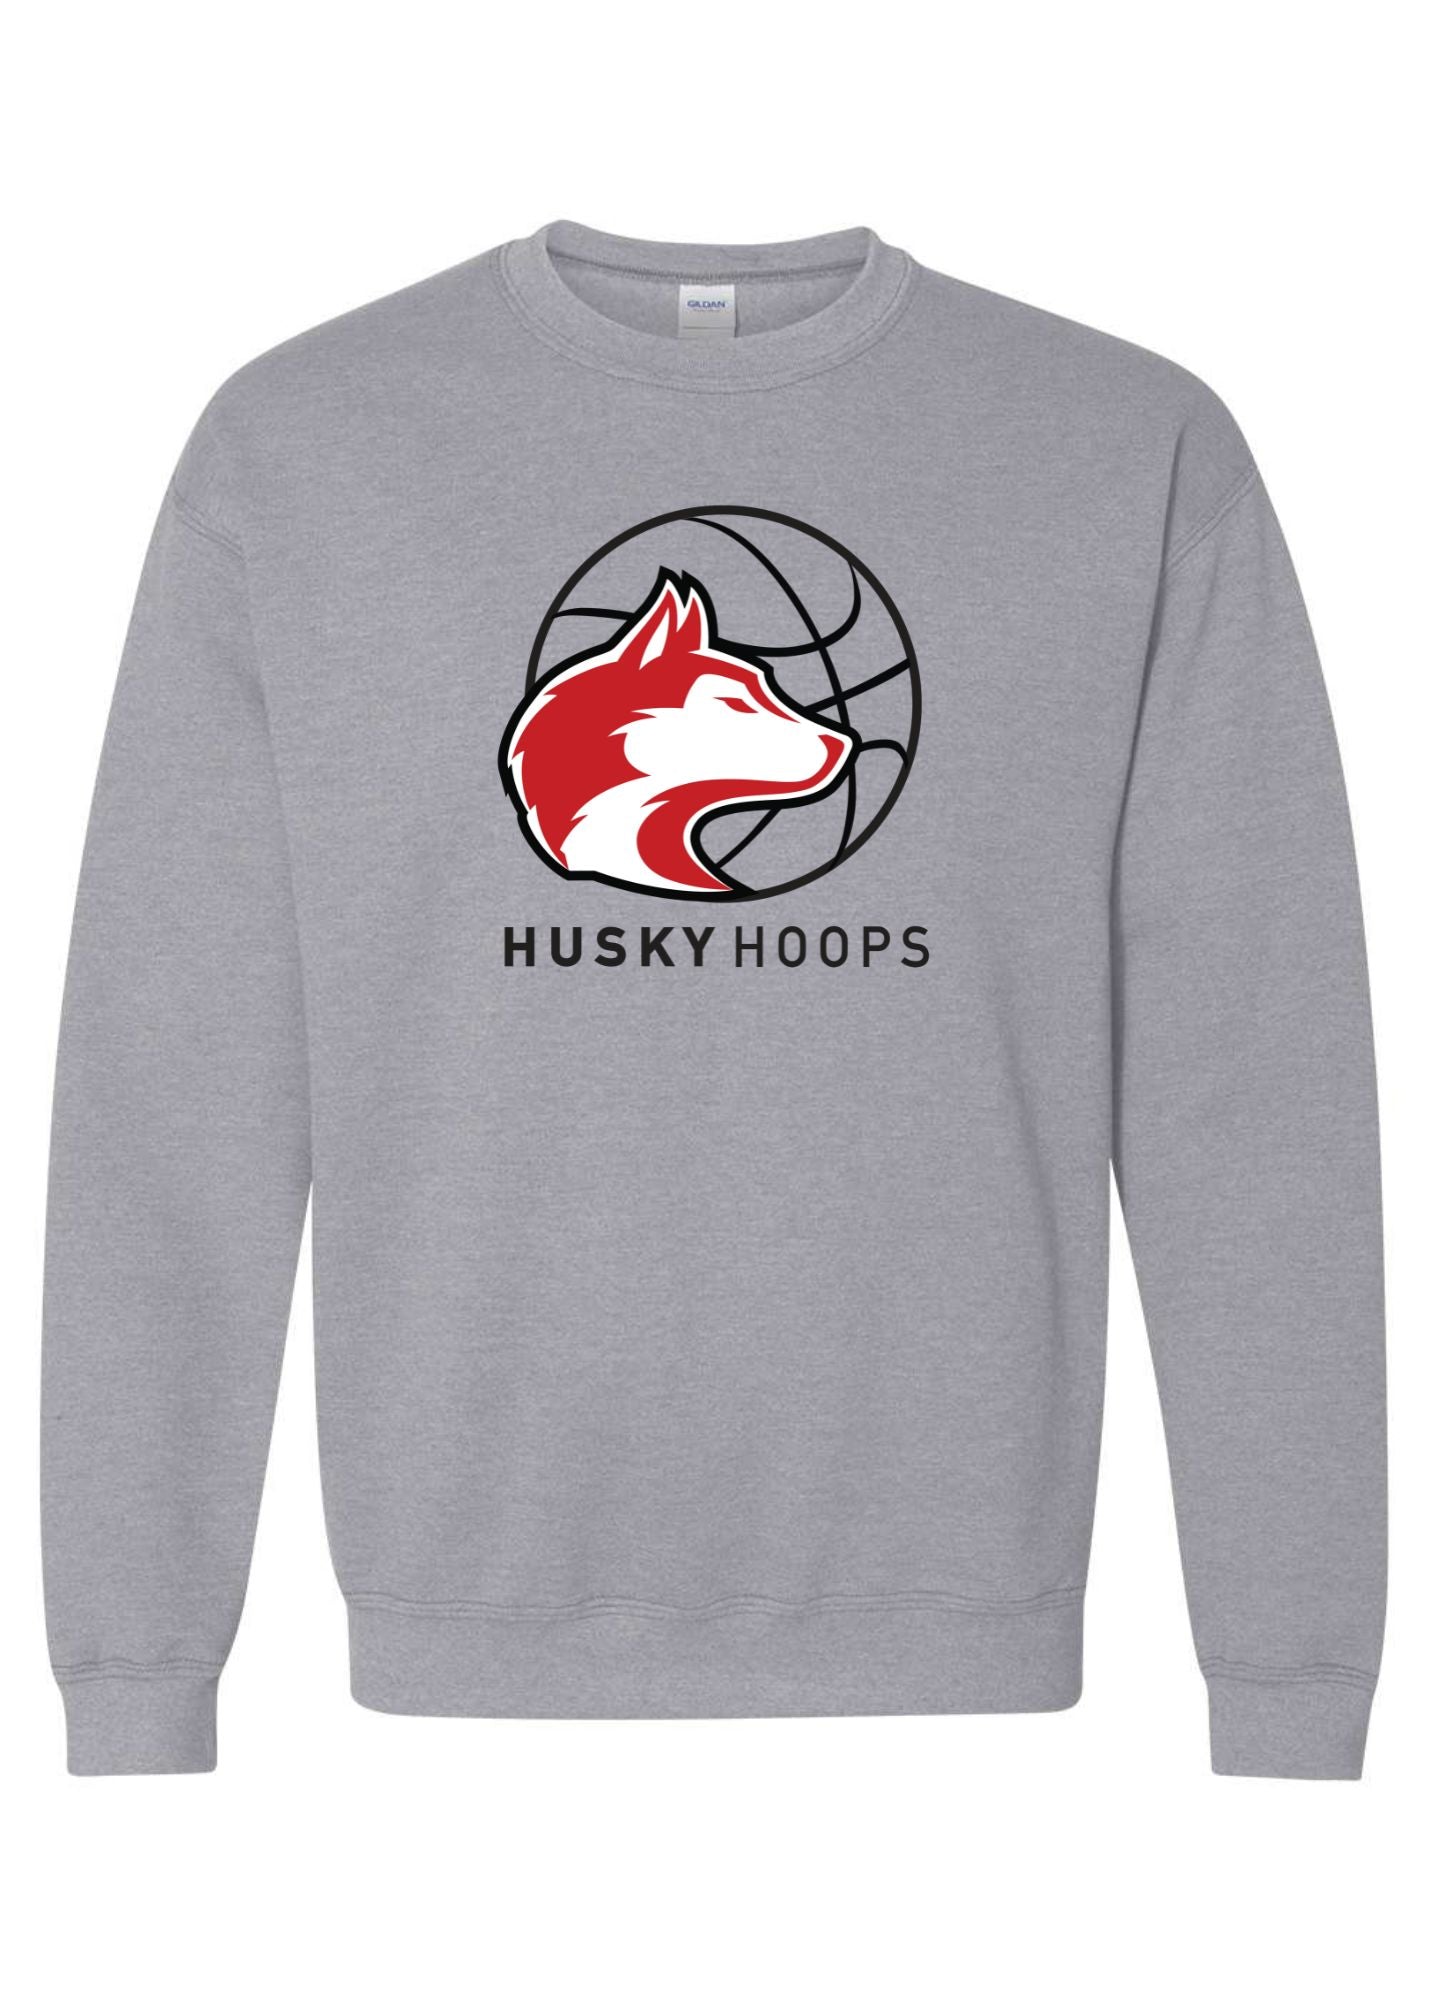 Husky Hoops | Kids Pullover-Kids Crewneck-Sister Shirts-Sister Shirts, Cute & Custom Tees for Mama & Littles in Trussville, Alabama.